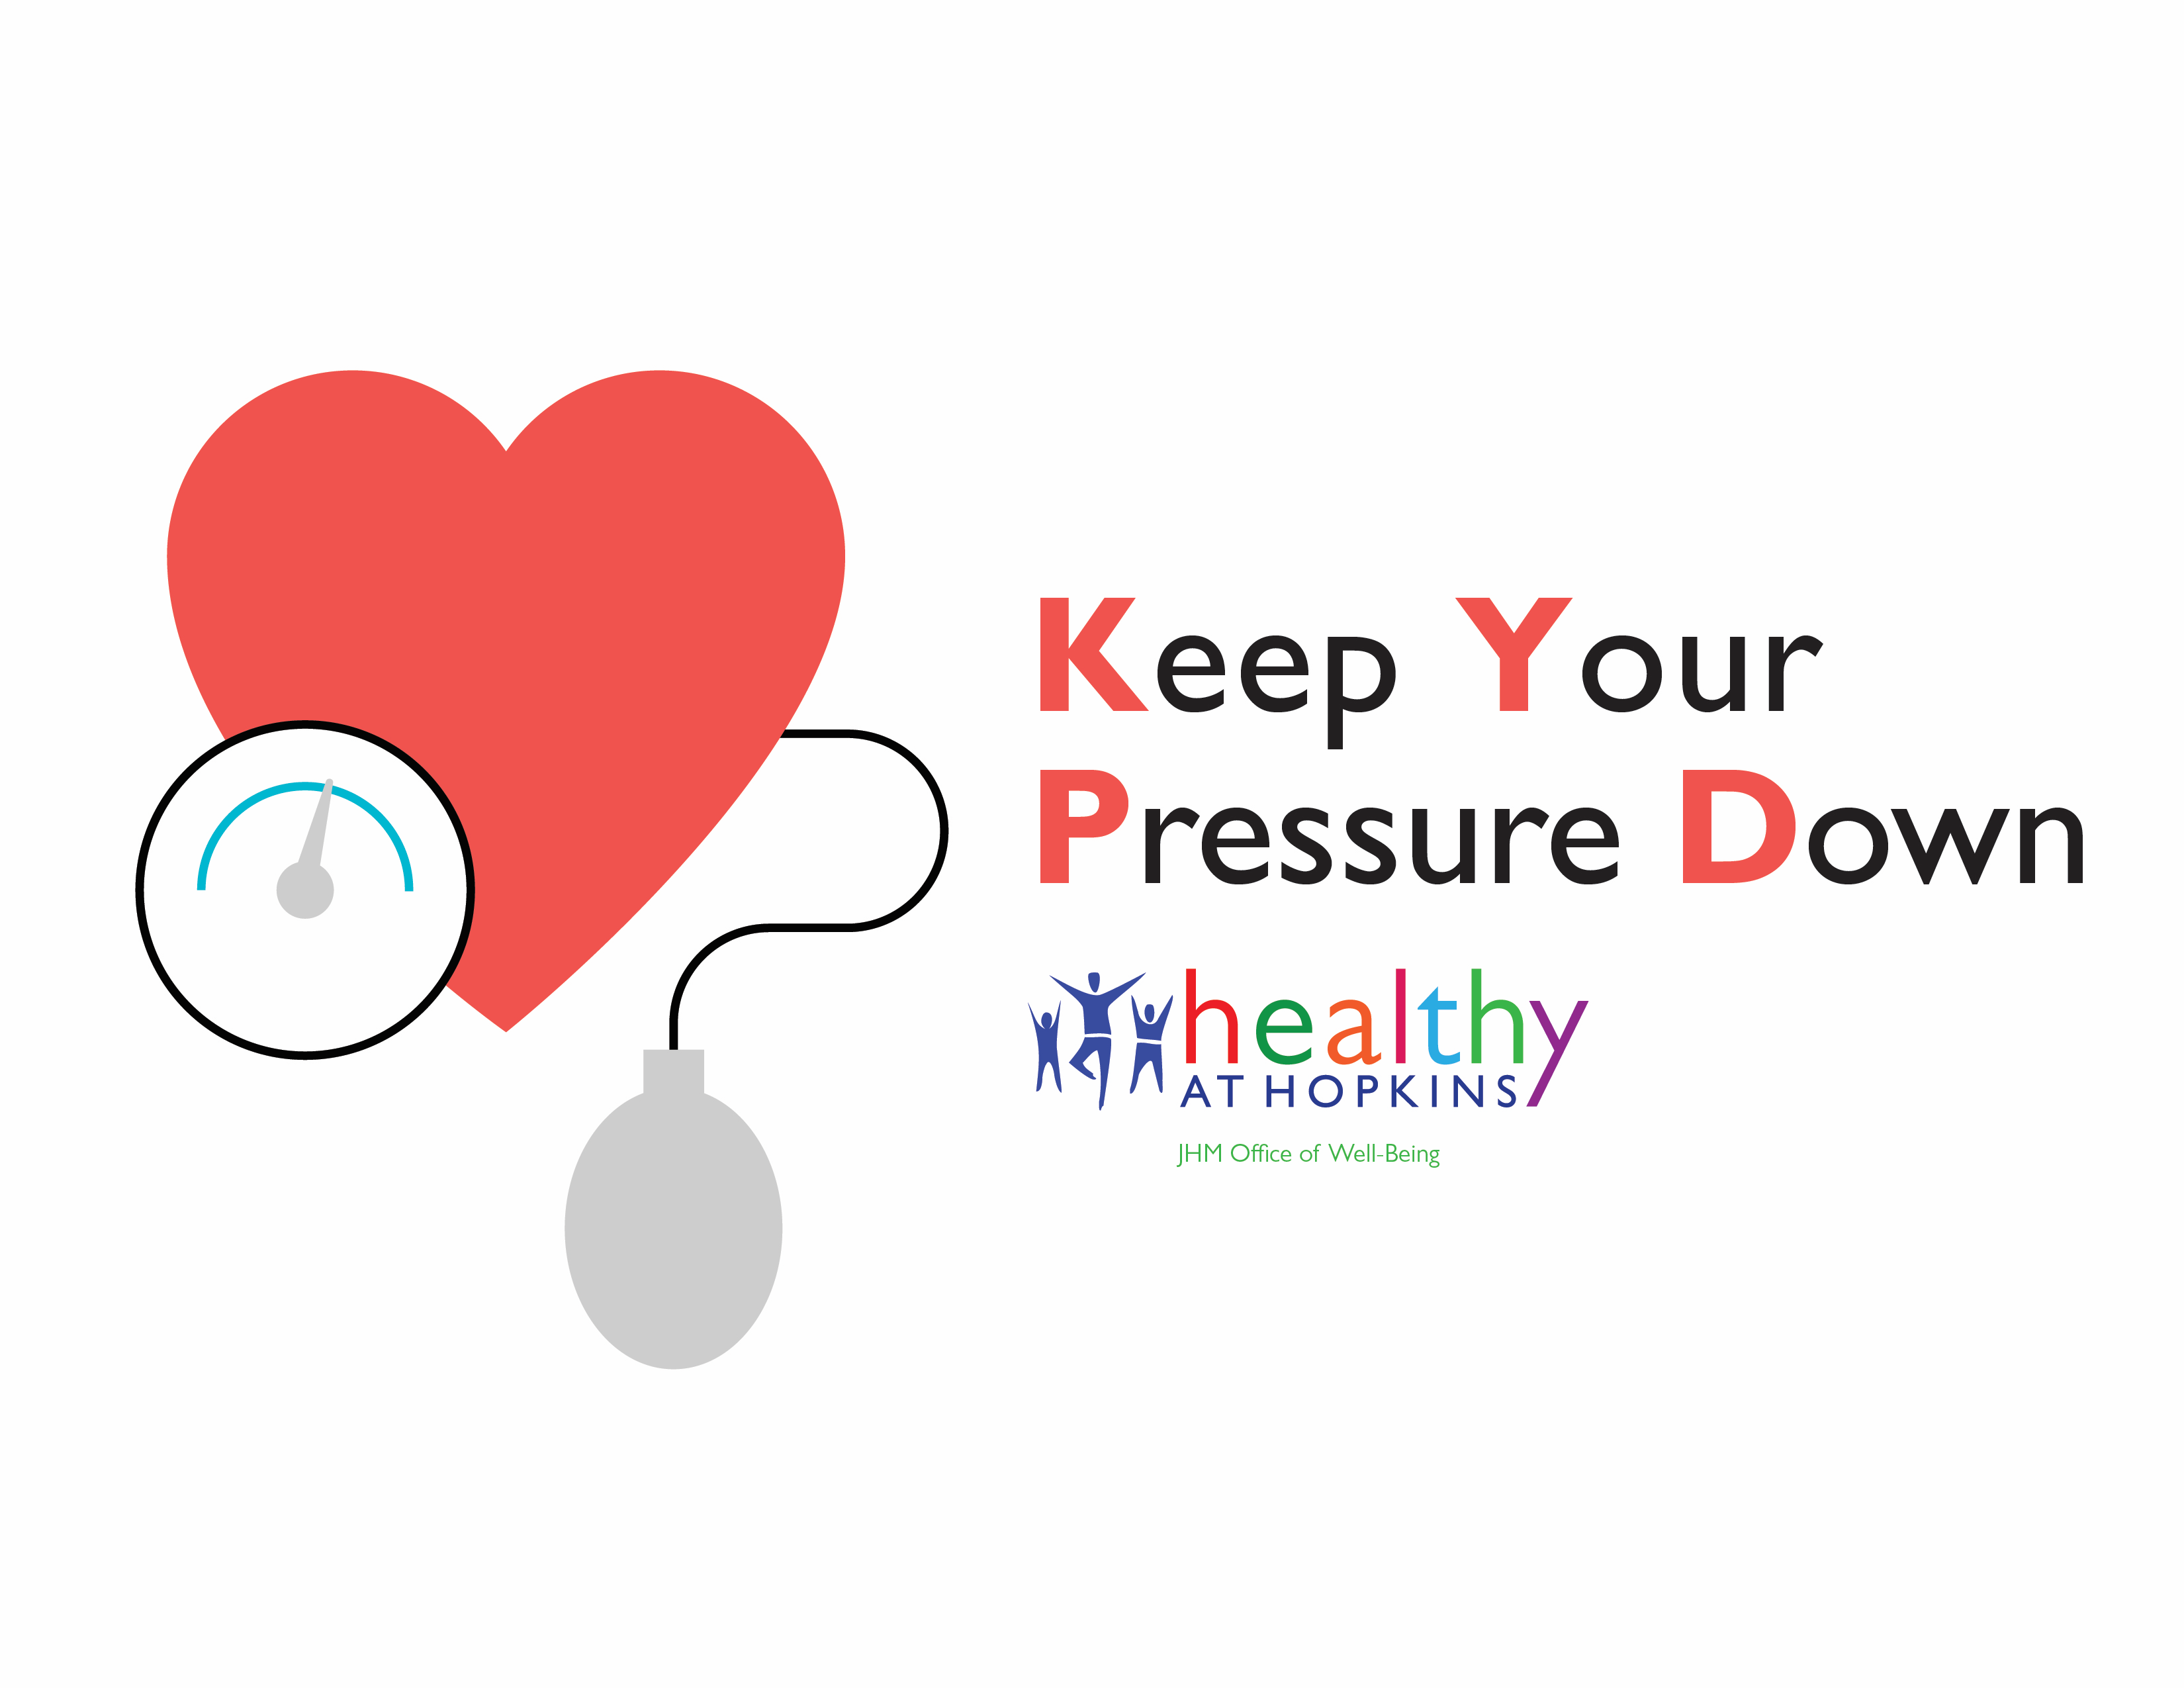 Keep Your Pressure Down logo with a logo of a heart and blood pressure monitor